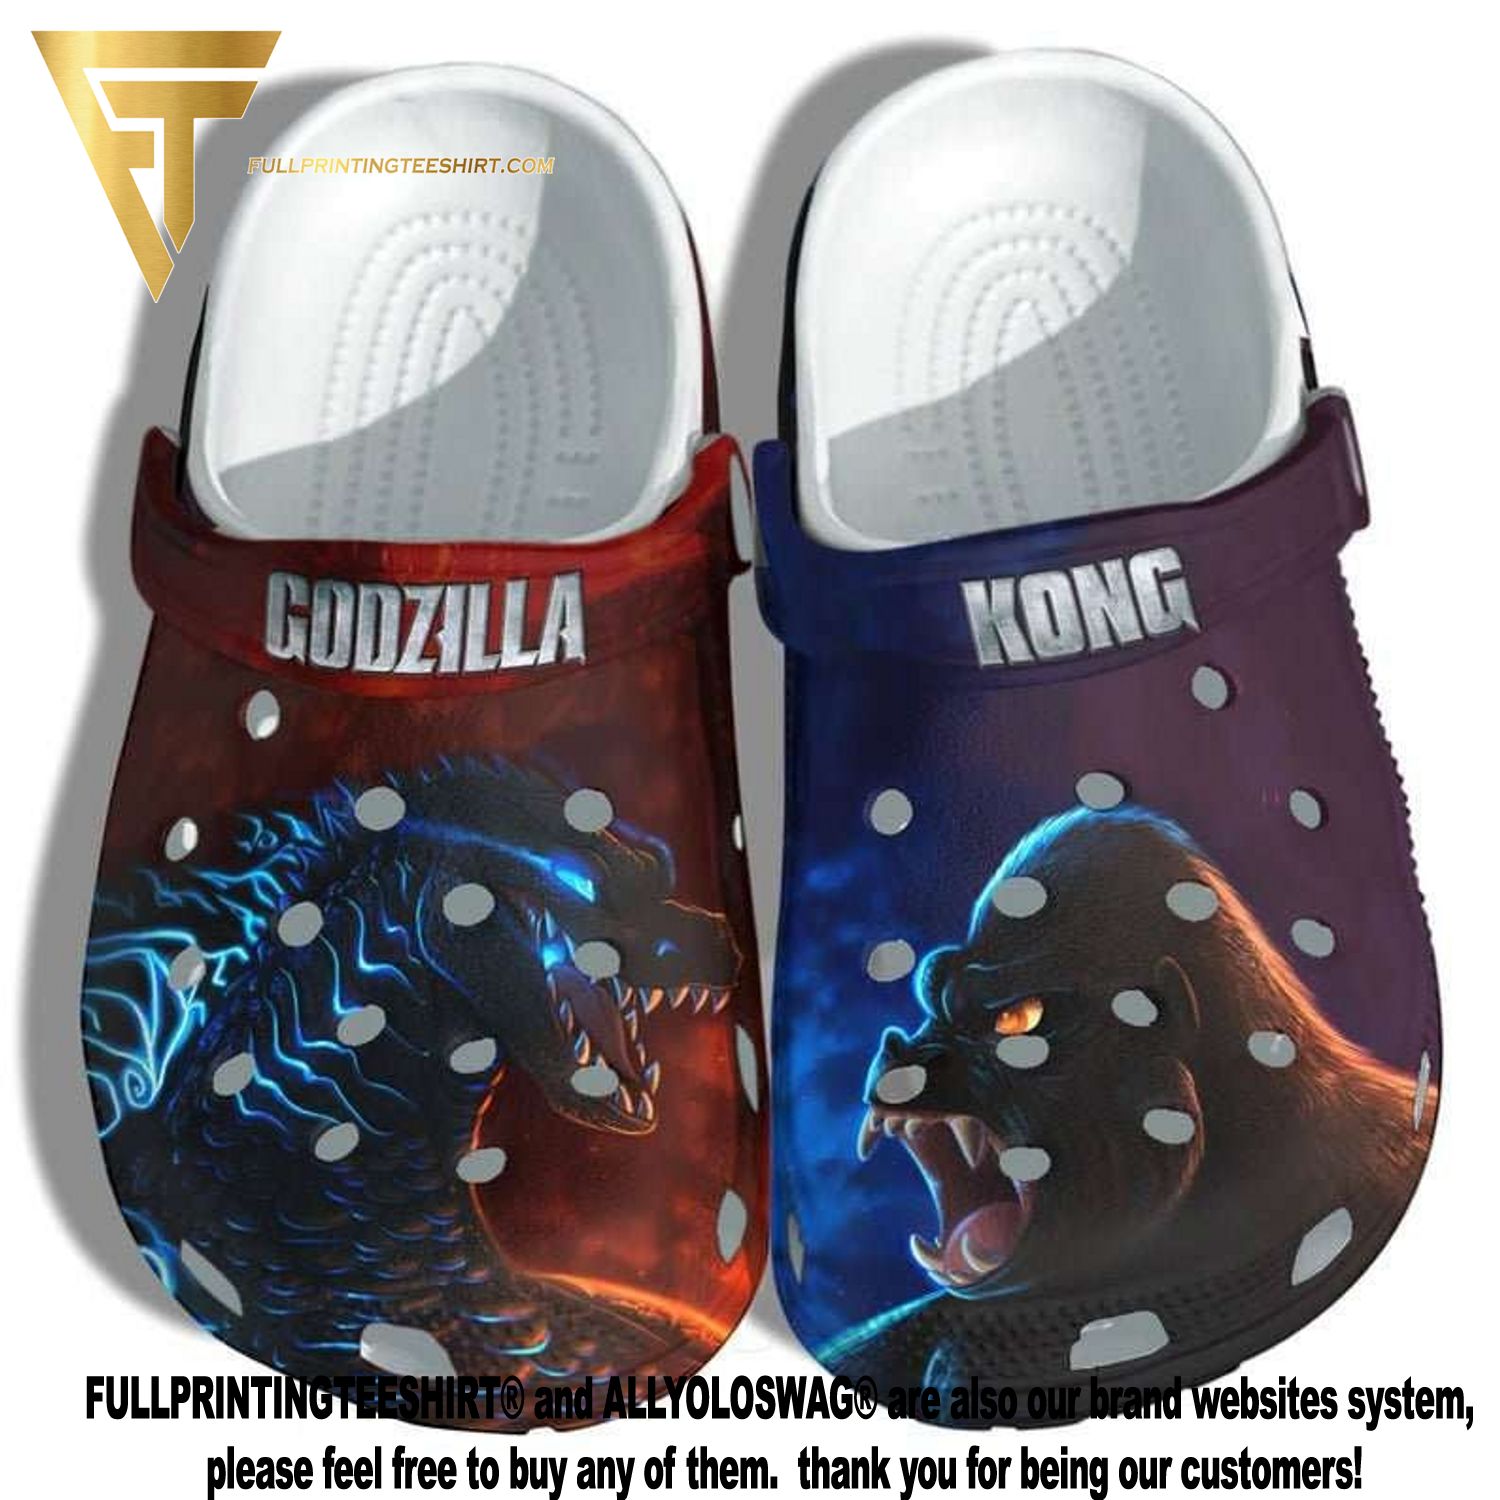 GODZILLA: MINUS ONE Shoes May Soon Be Available for You to Buy - Nerdist